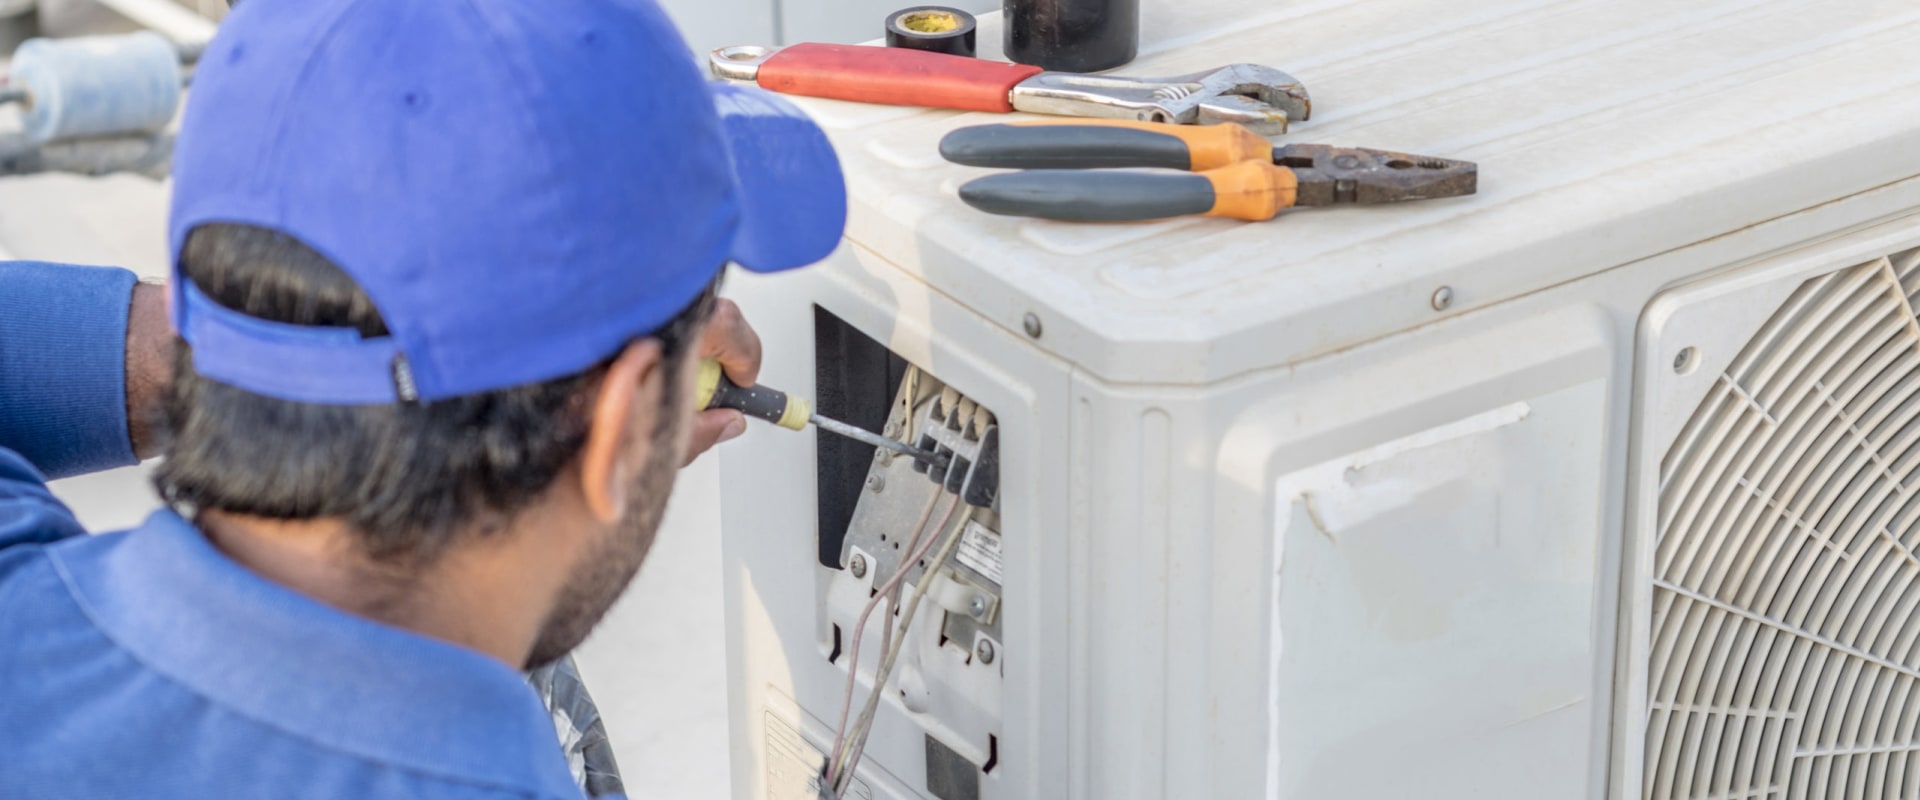 The Benefits of an HVAC Tune Up Service: Get the Most Out of Your System